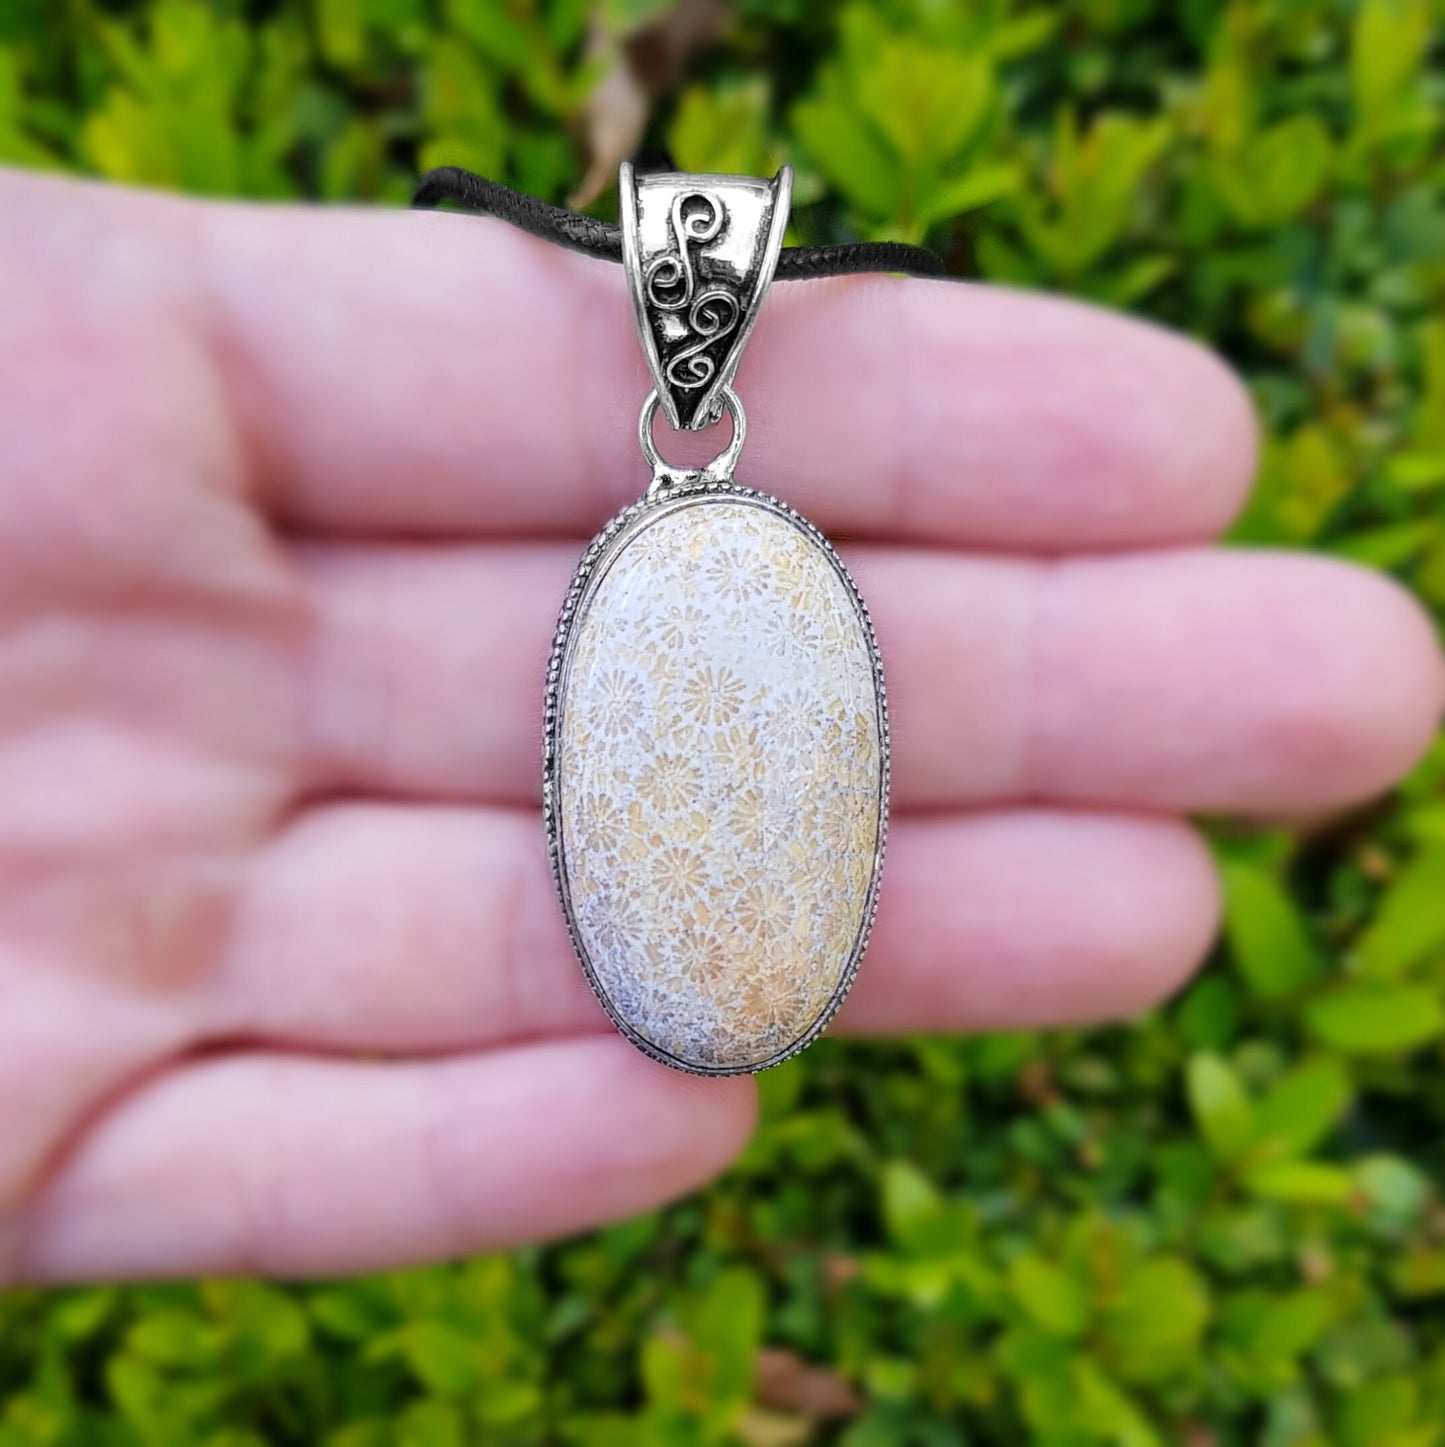 Coral Fossil Necklace In Sterling Silver Boho Crystal Necklace GypsyJewelry Statement Pendant One Of A Kind Jewelry Unique Gift